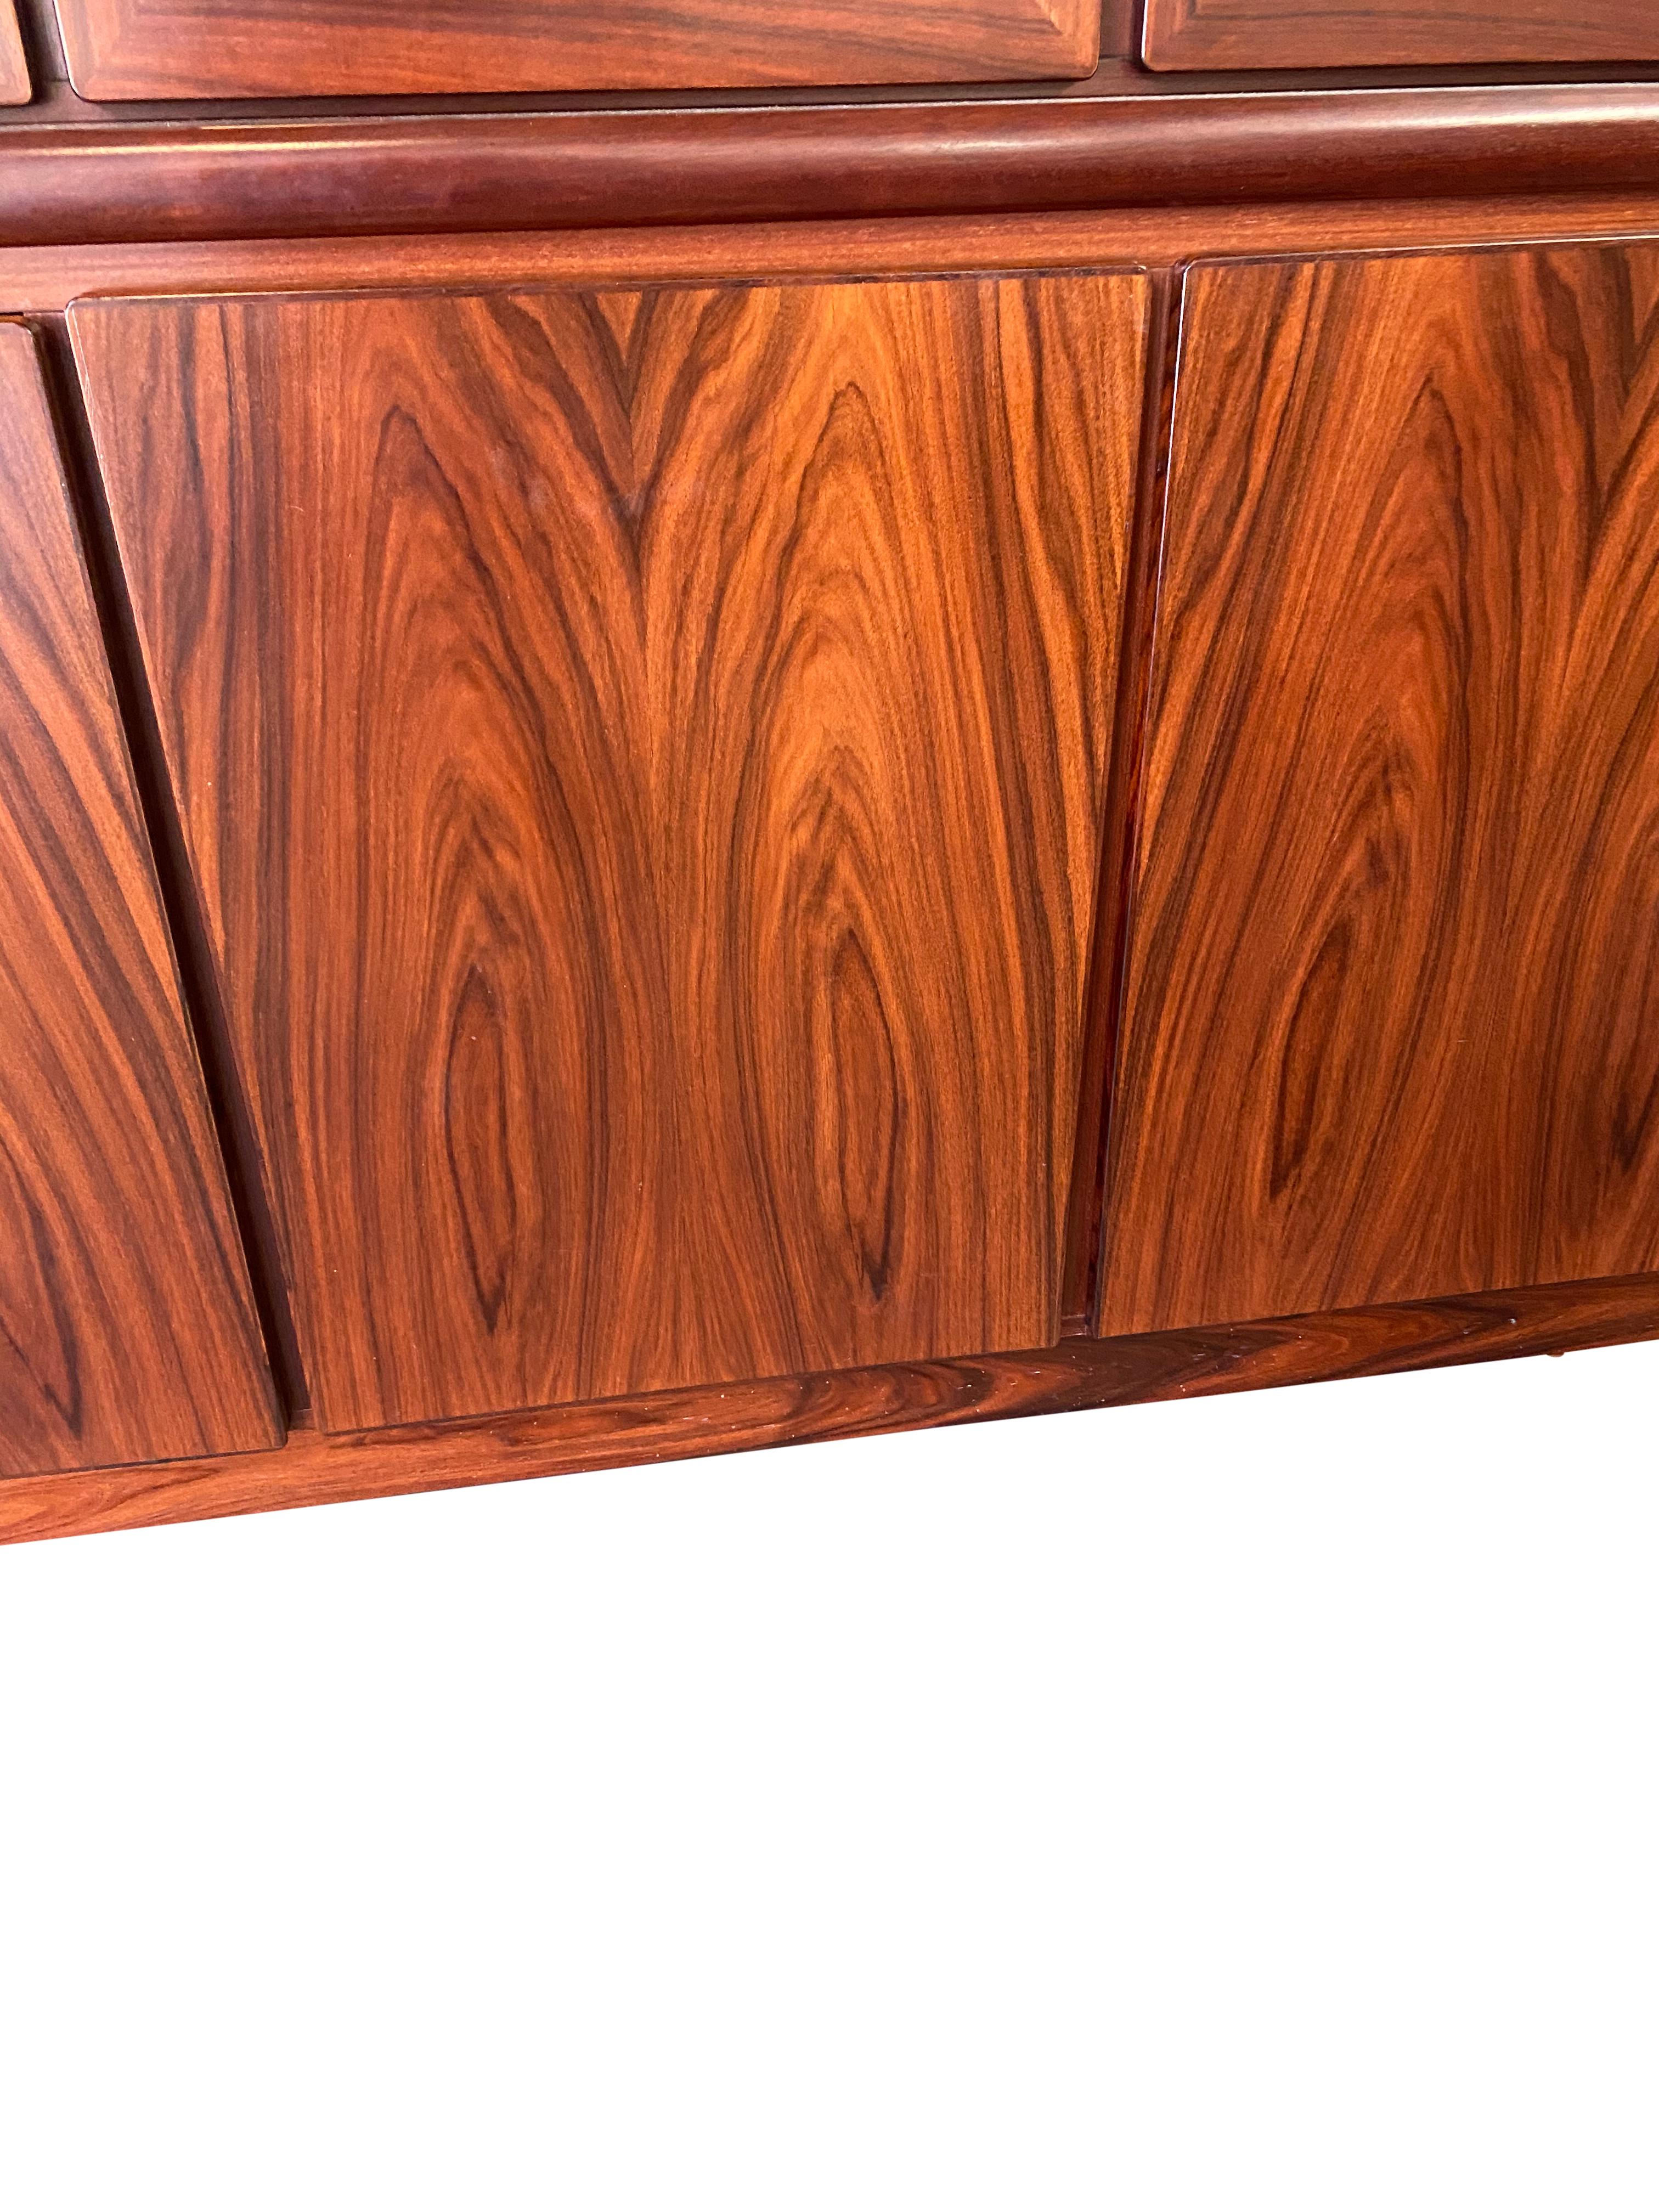 20th Century Gorgeous Danish Modern Rosewood Credenza and Hutch/China Cabinet by Rasmus